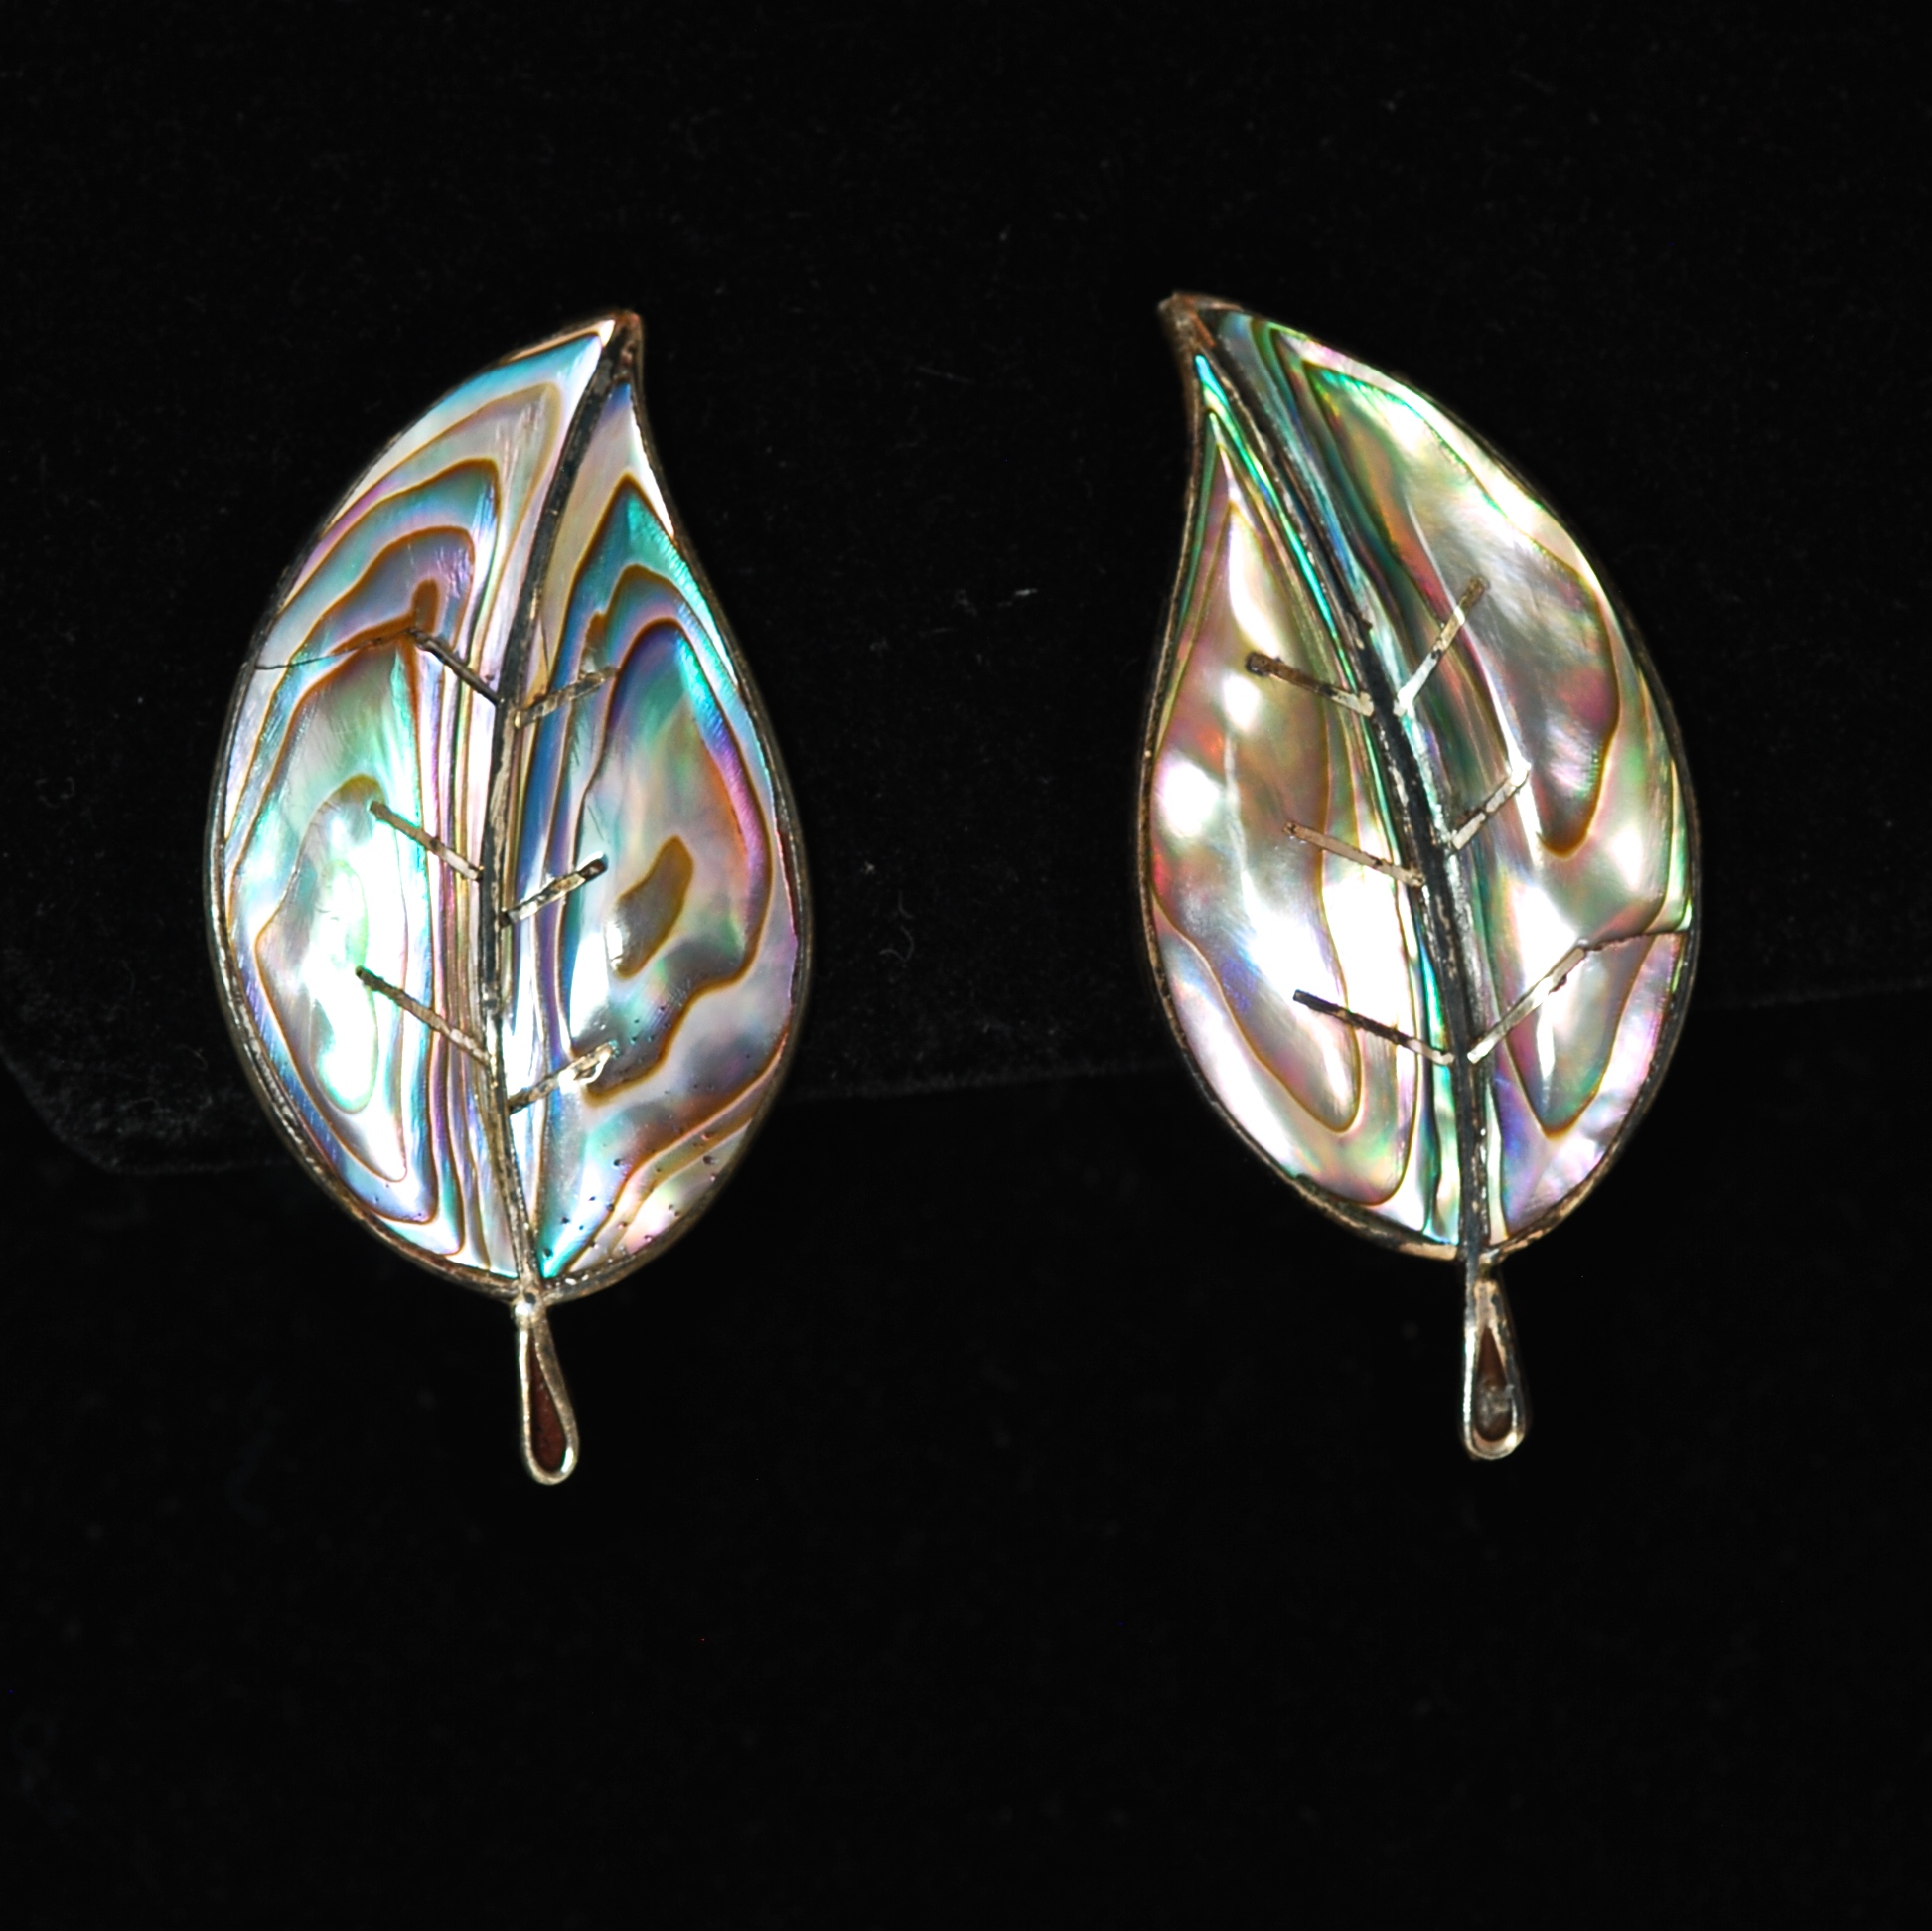 Antique Leaf Shaped Sterling Silver Earrings With Inlaid Abalone